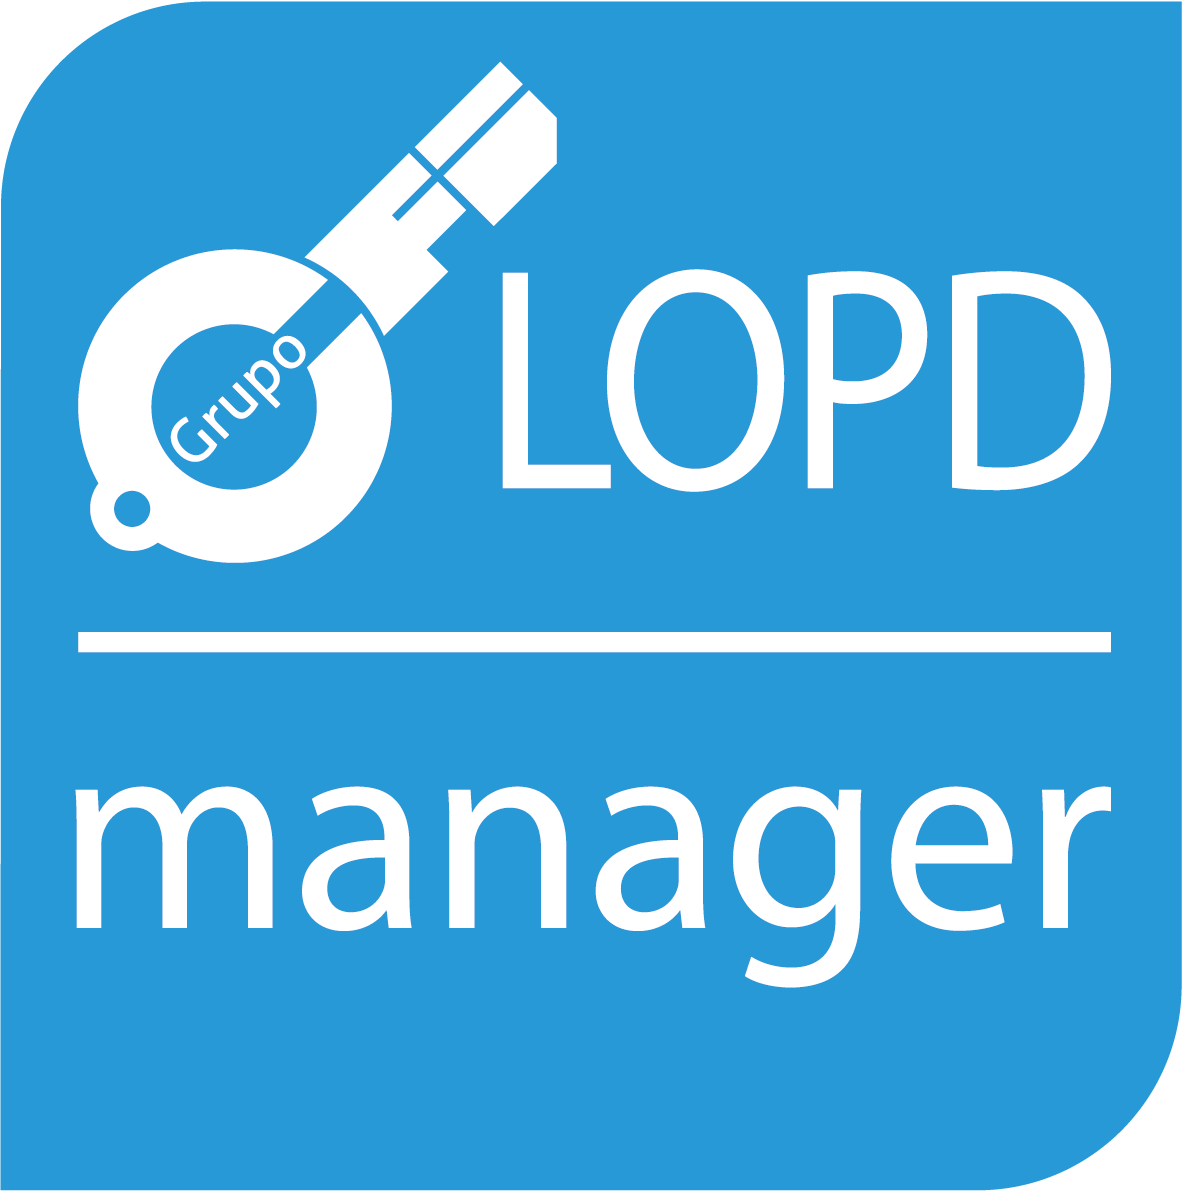 LOPD manager